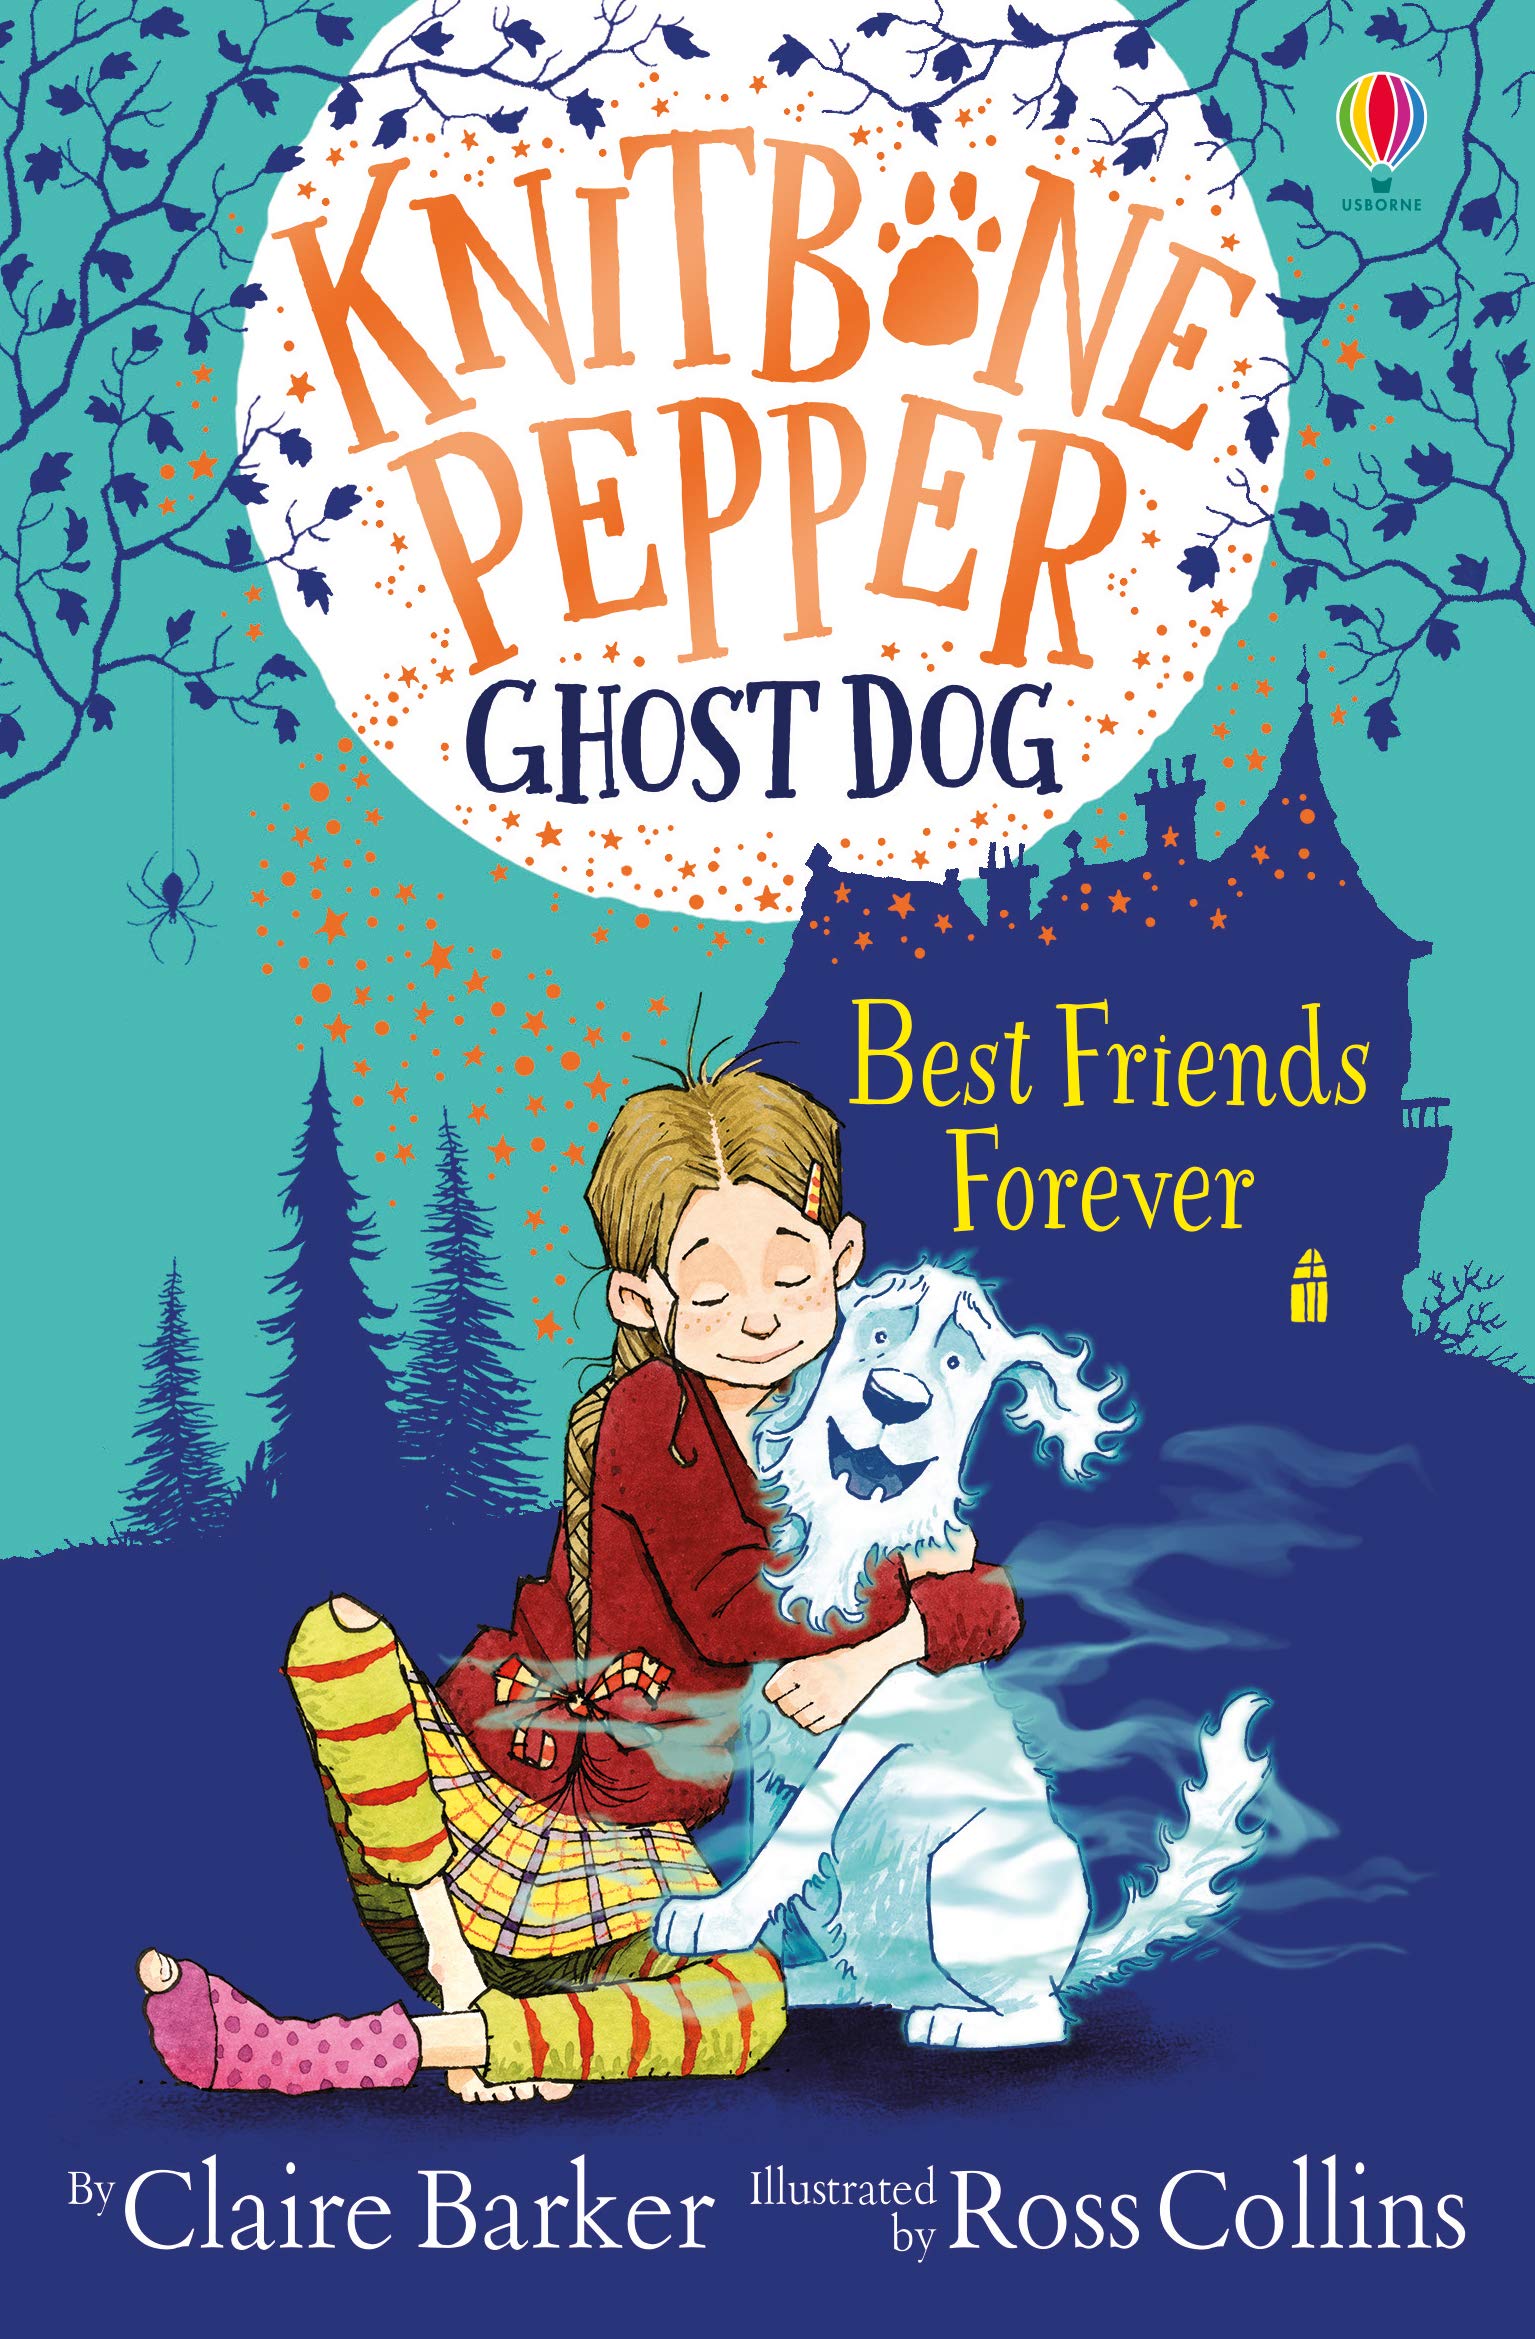 Best Friends Forever (Knitbone Pepper Ghost Dog #1) | Claire Barker